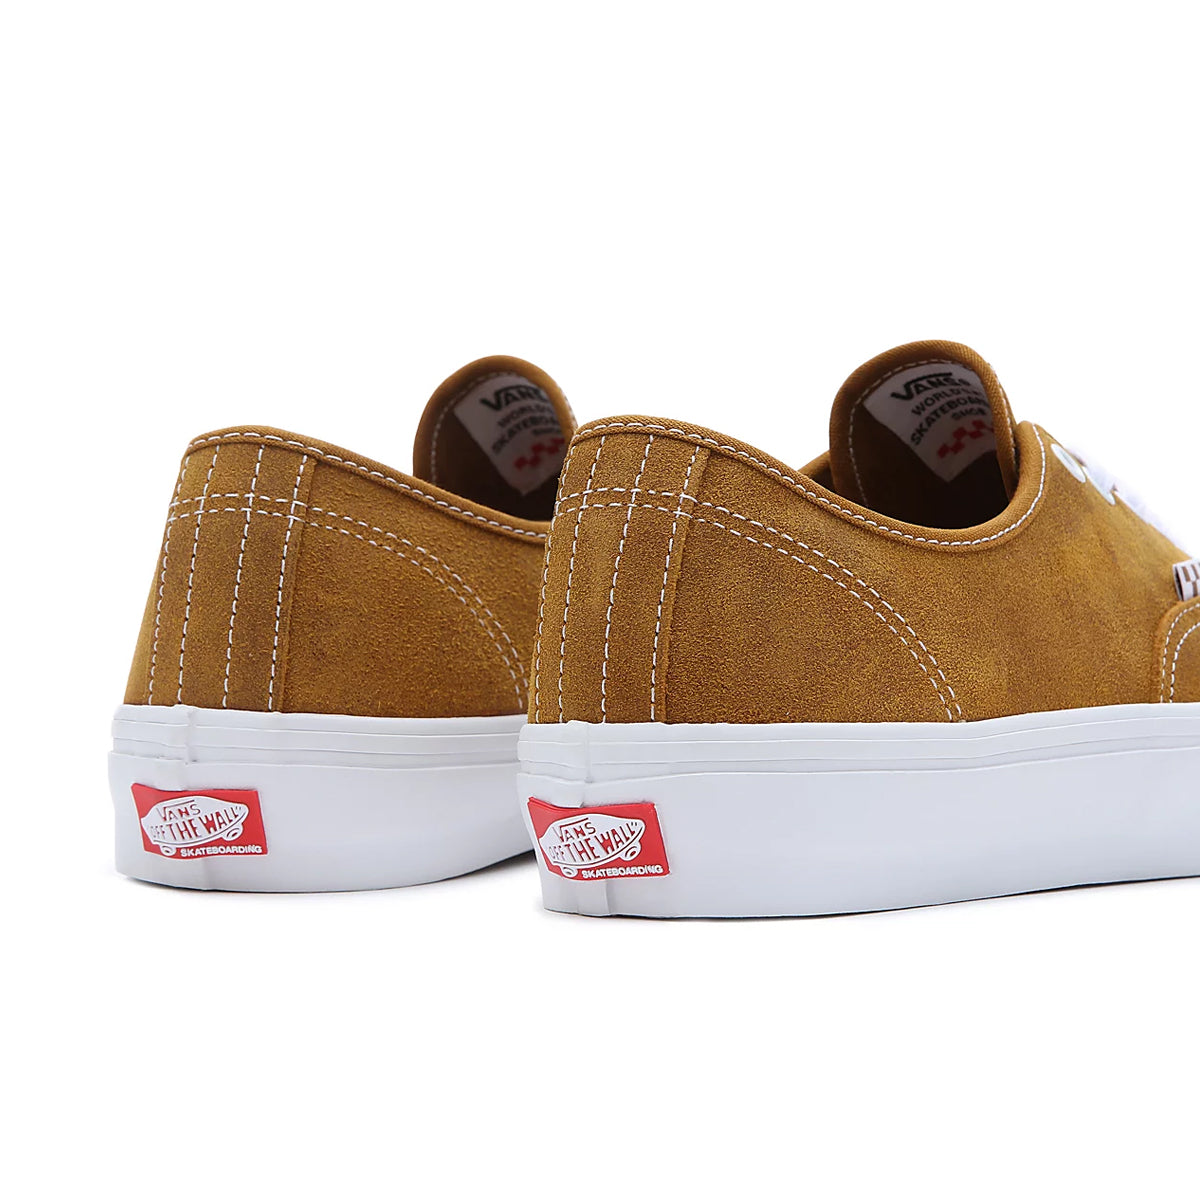 MN SKATE AUTHENTIC LEATHER GOLDEN BROWN